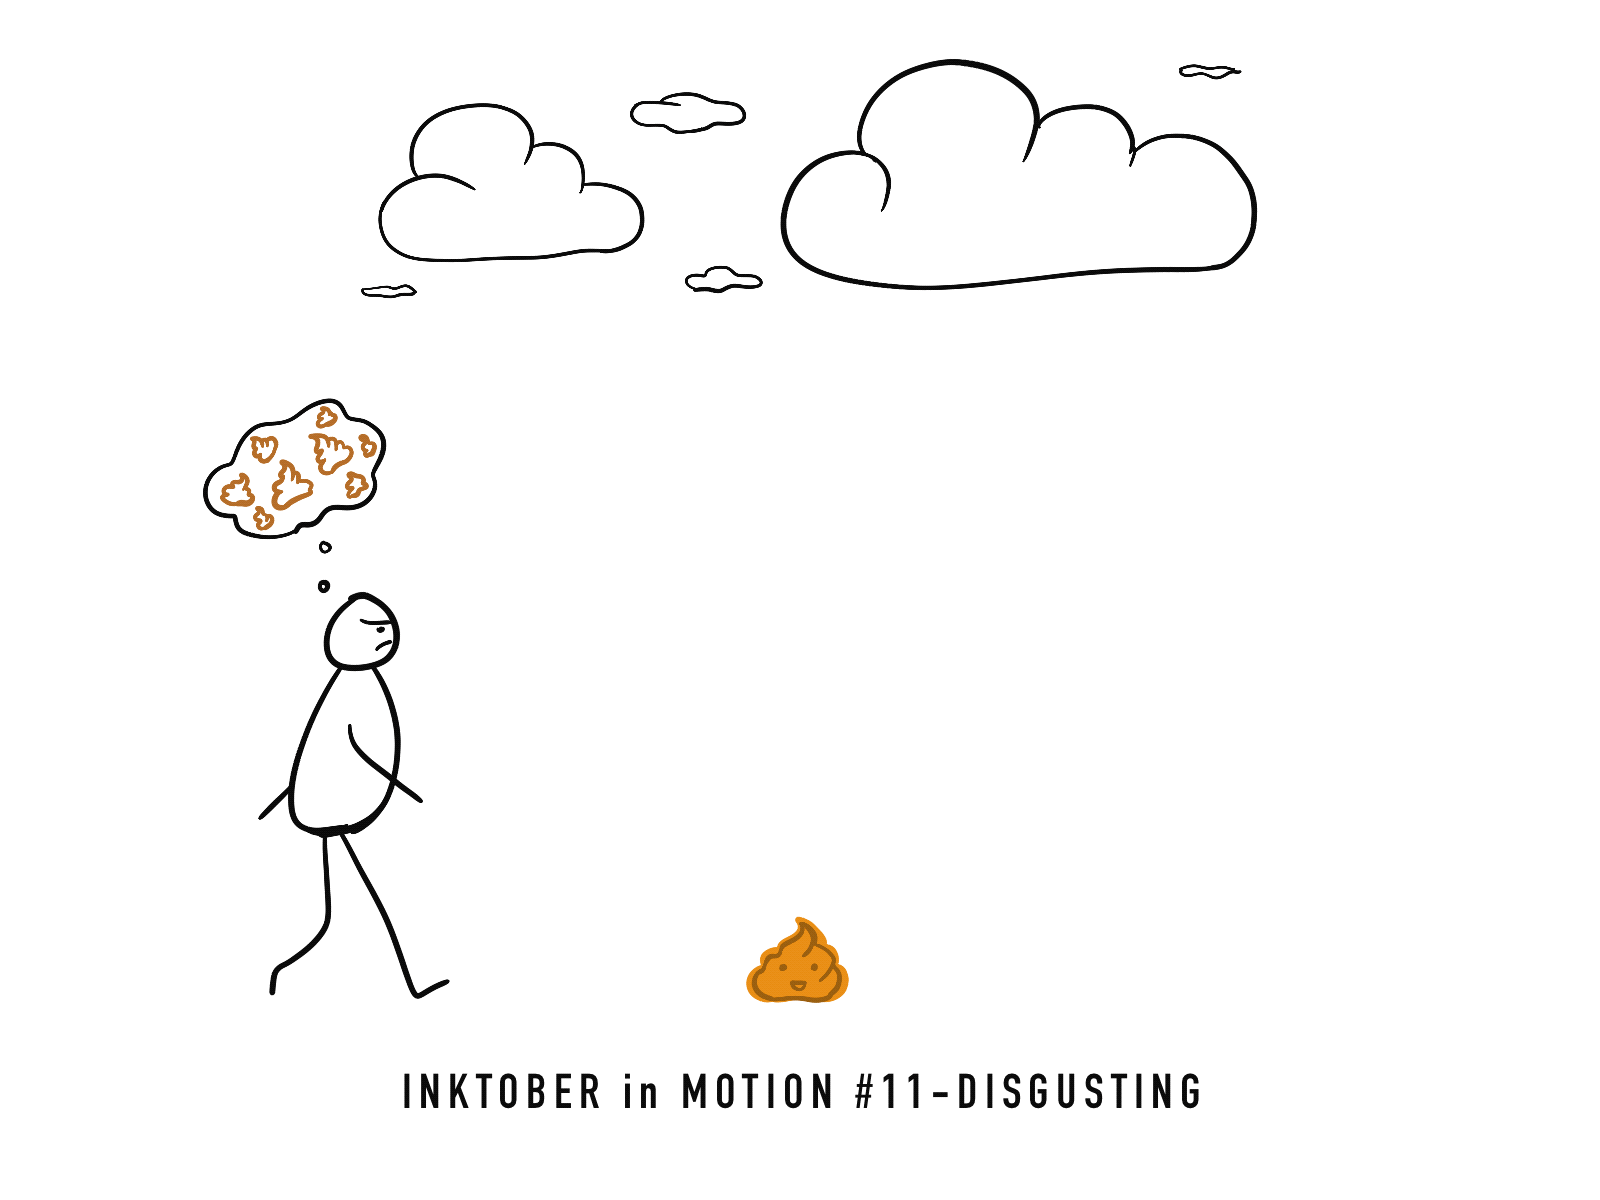 #11 Disgusting animated animation bad thoughts disgusting doodles illustration inktober inktober2020 motion motion design procreate sketching